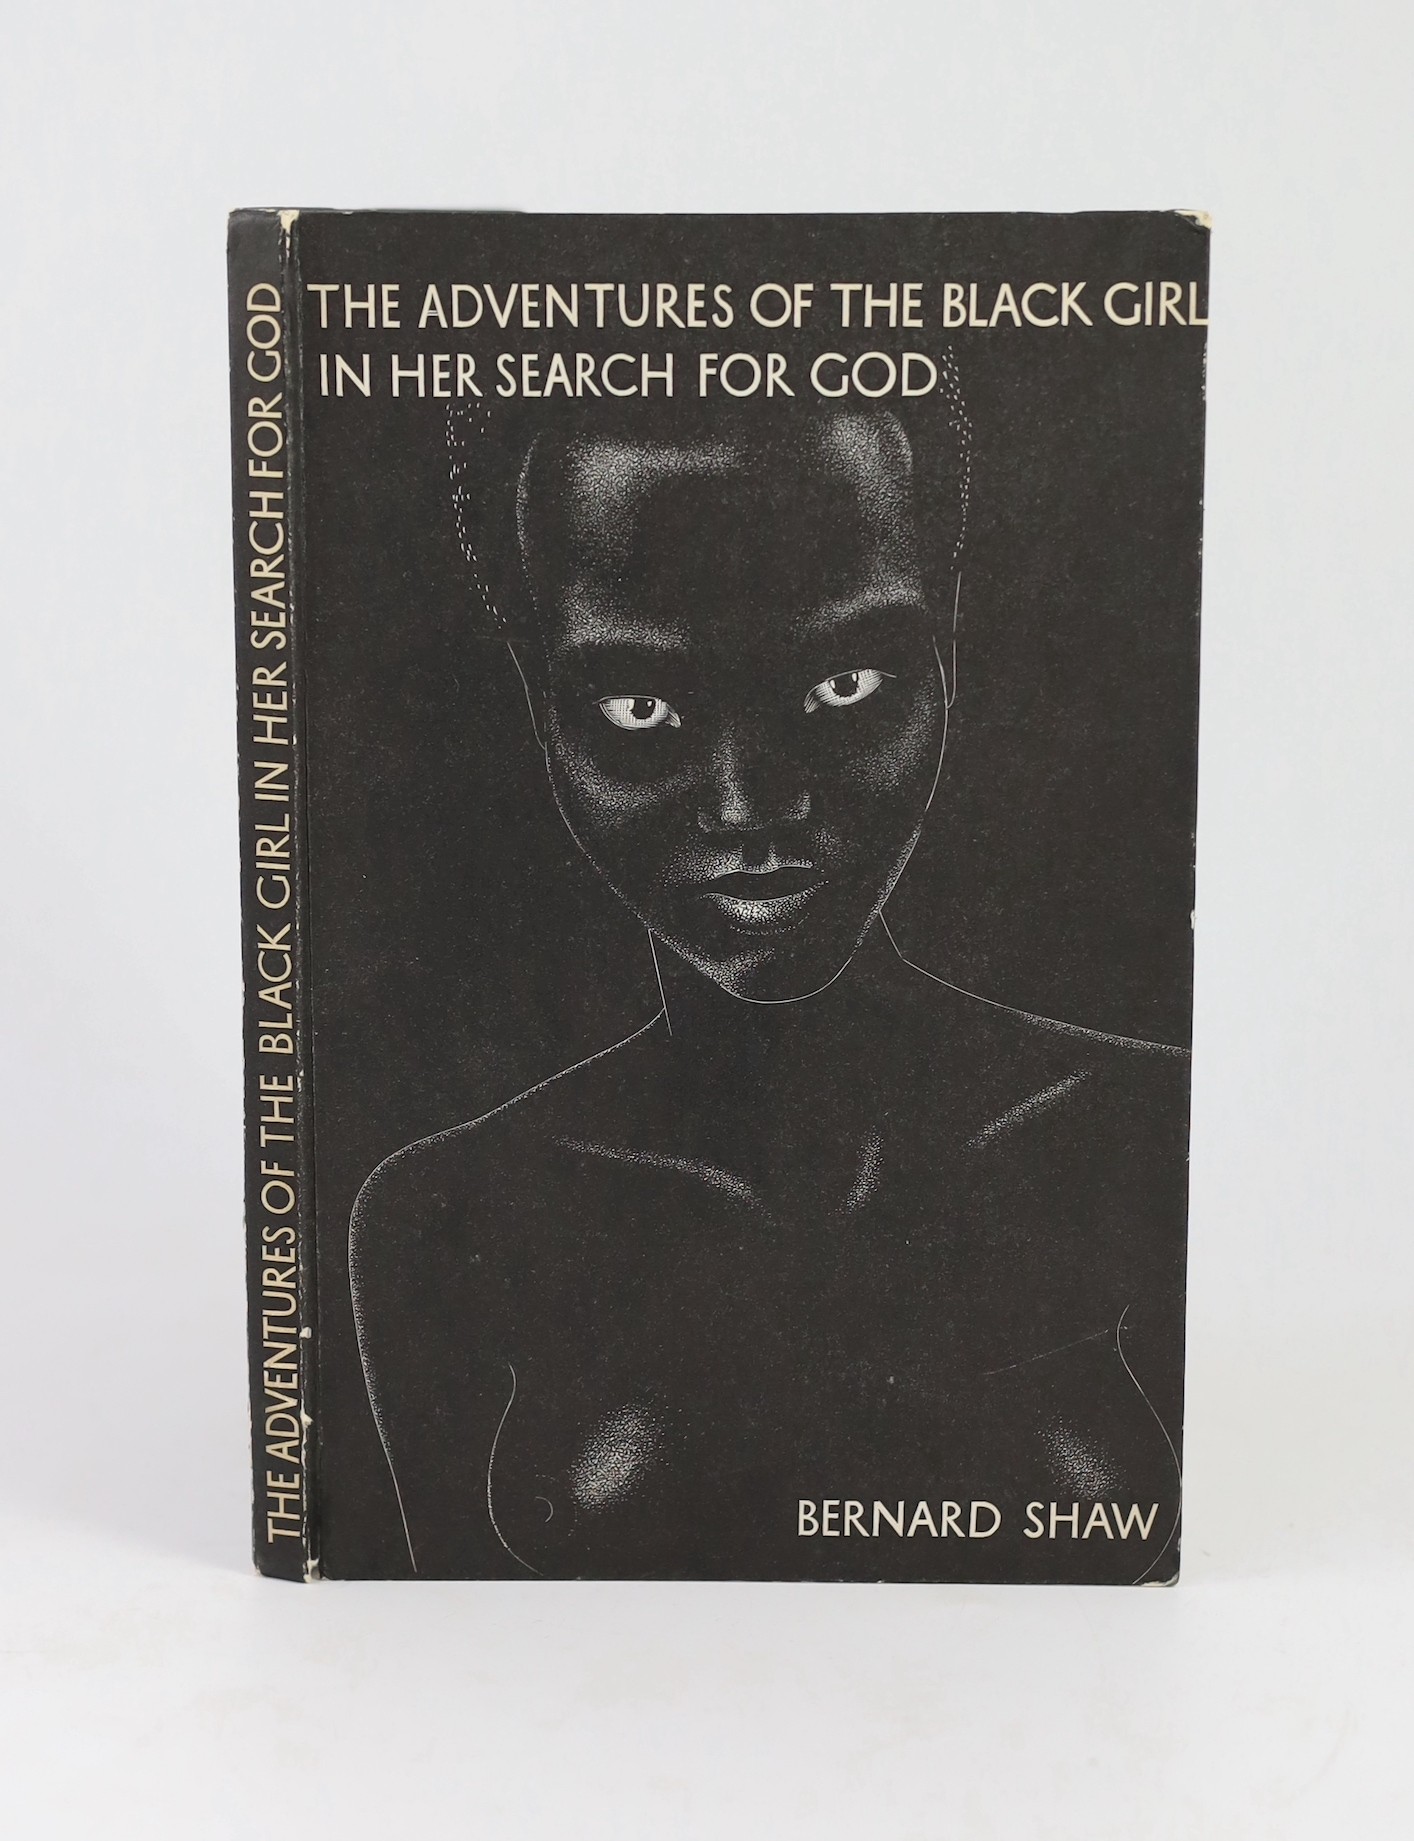 Shaw, Bernard - The Adventures of the Black Girl in her Search for God, 1st edition, illustrated with 20 wood engravings by John Farleigh, 8vo, original pictorial boards, Constable & Company Limited, London, 1932